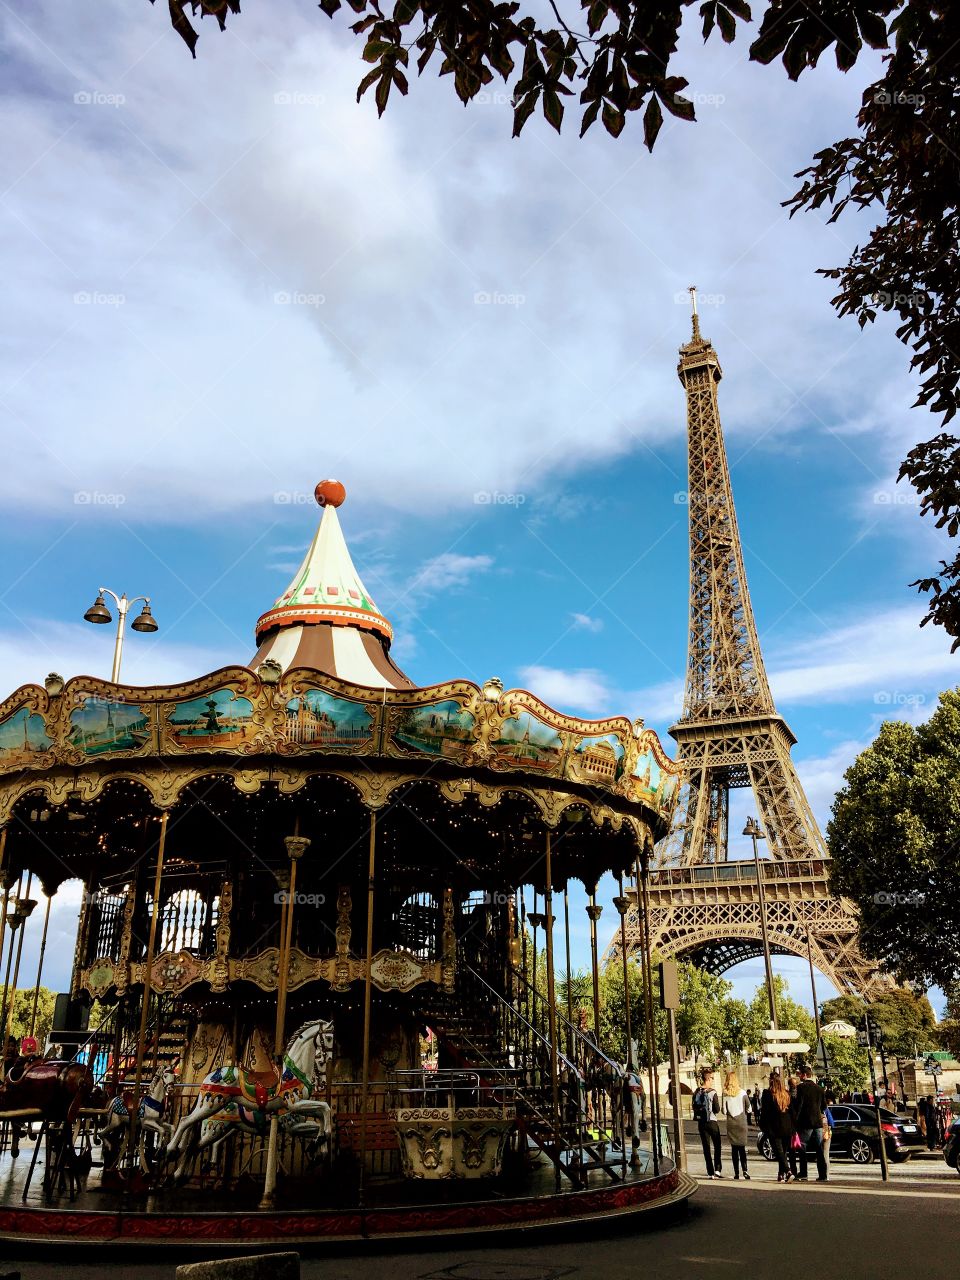 Eiffel Tower and Carousel 